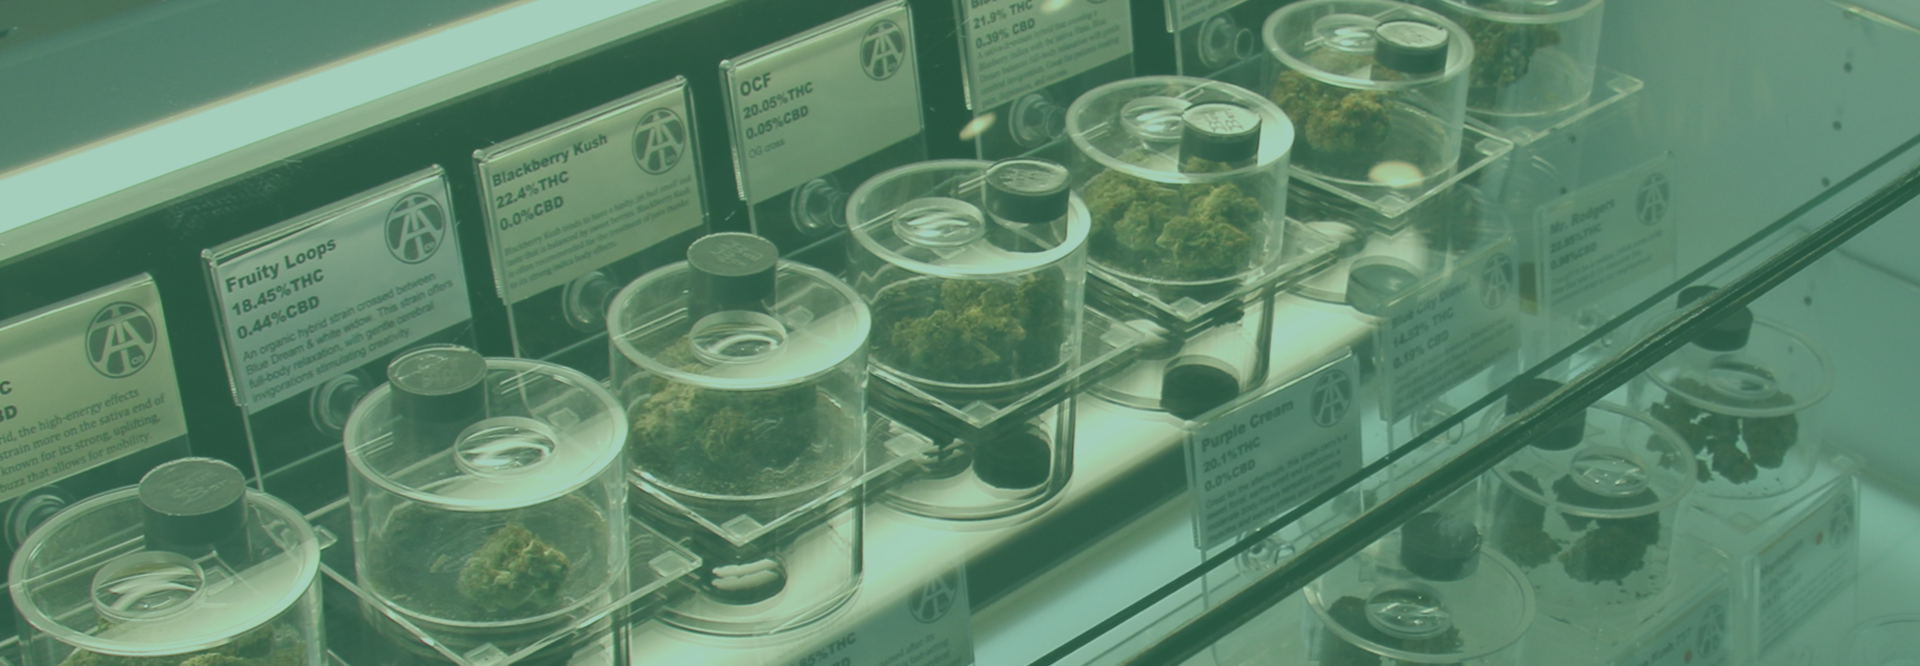 Cannabis flower on display in dispensary